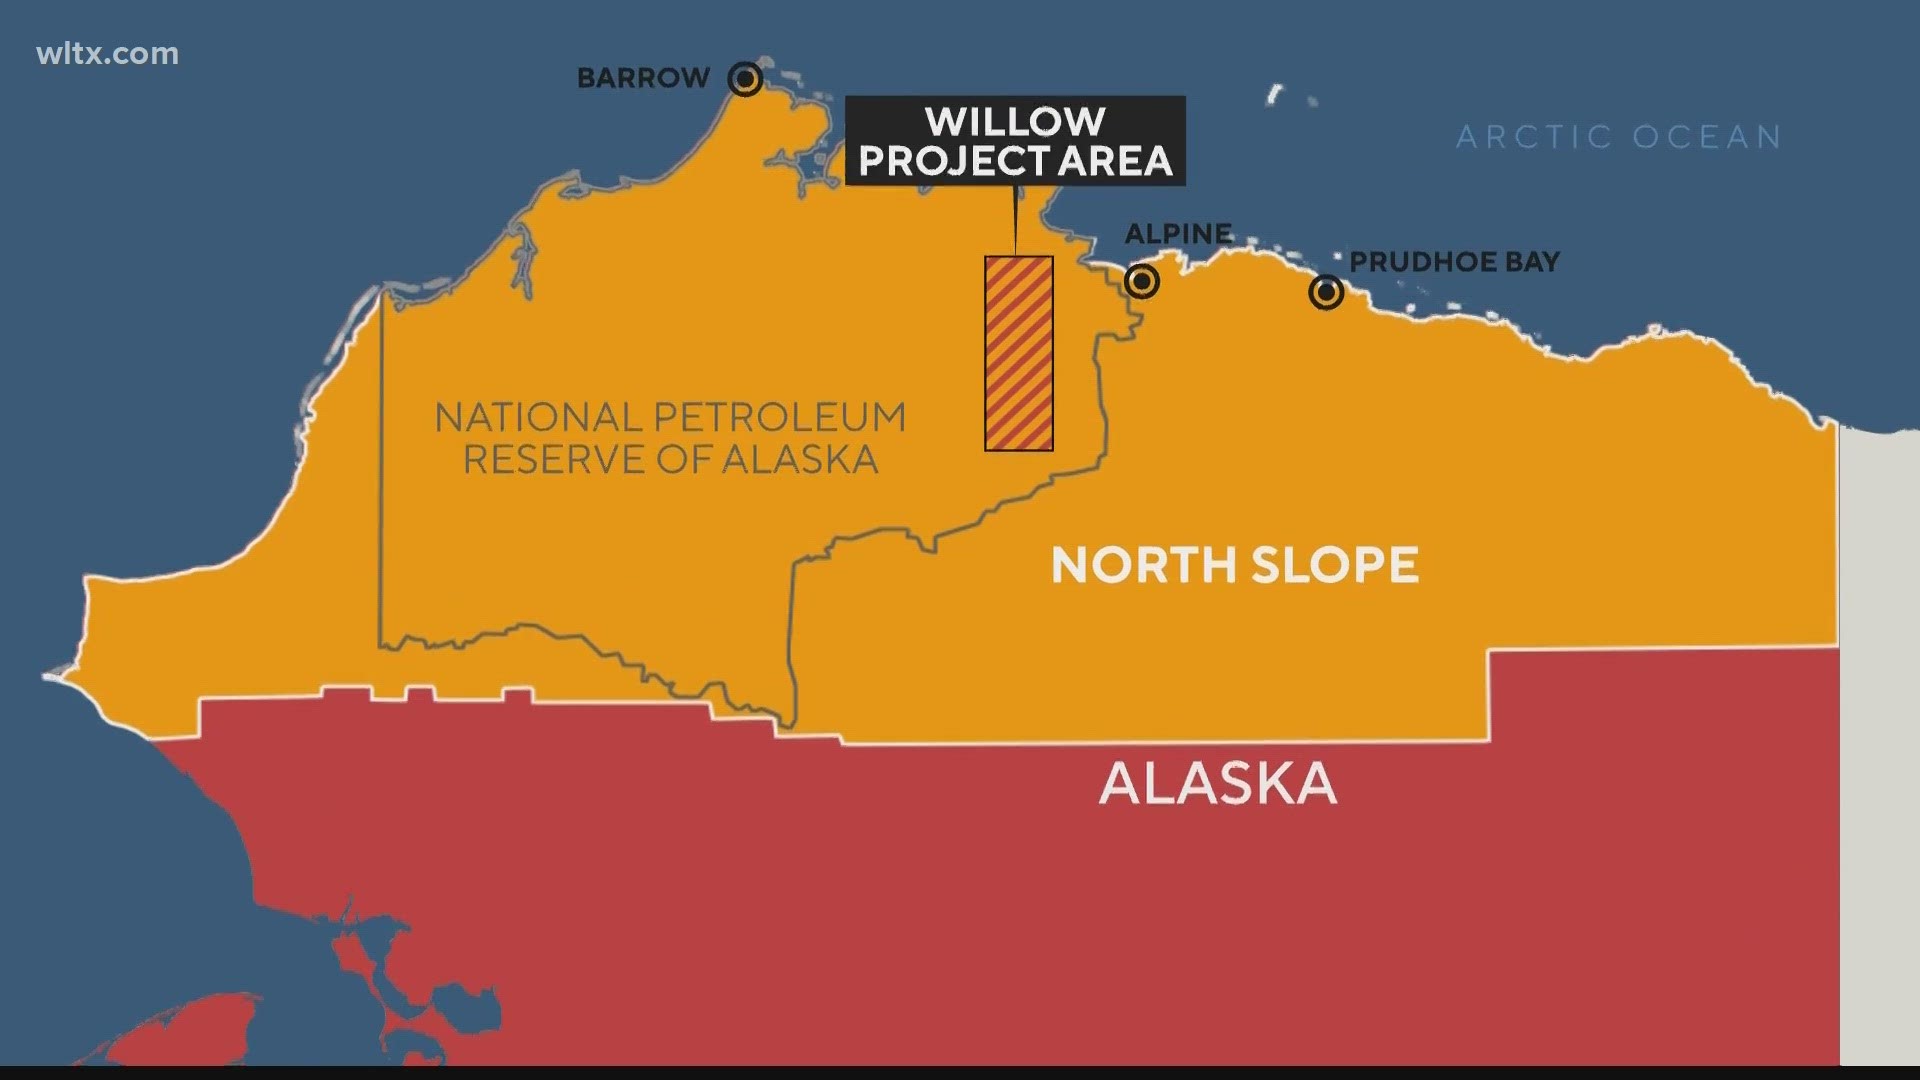 President Biden is facing backlash from environmentalists over his approval of a massive oil drilling project in Alaska.